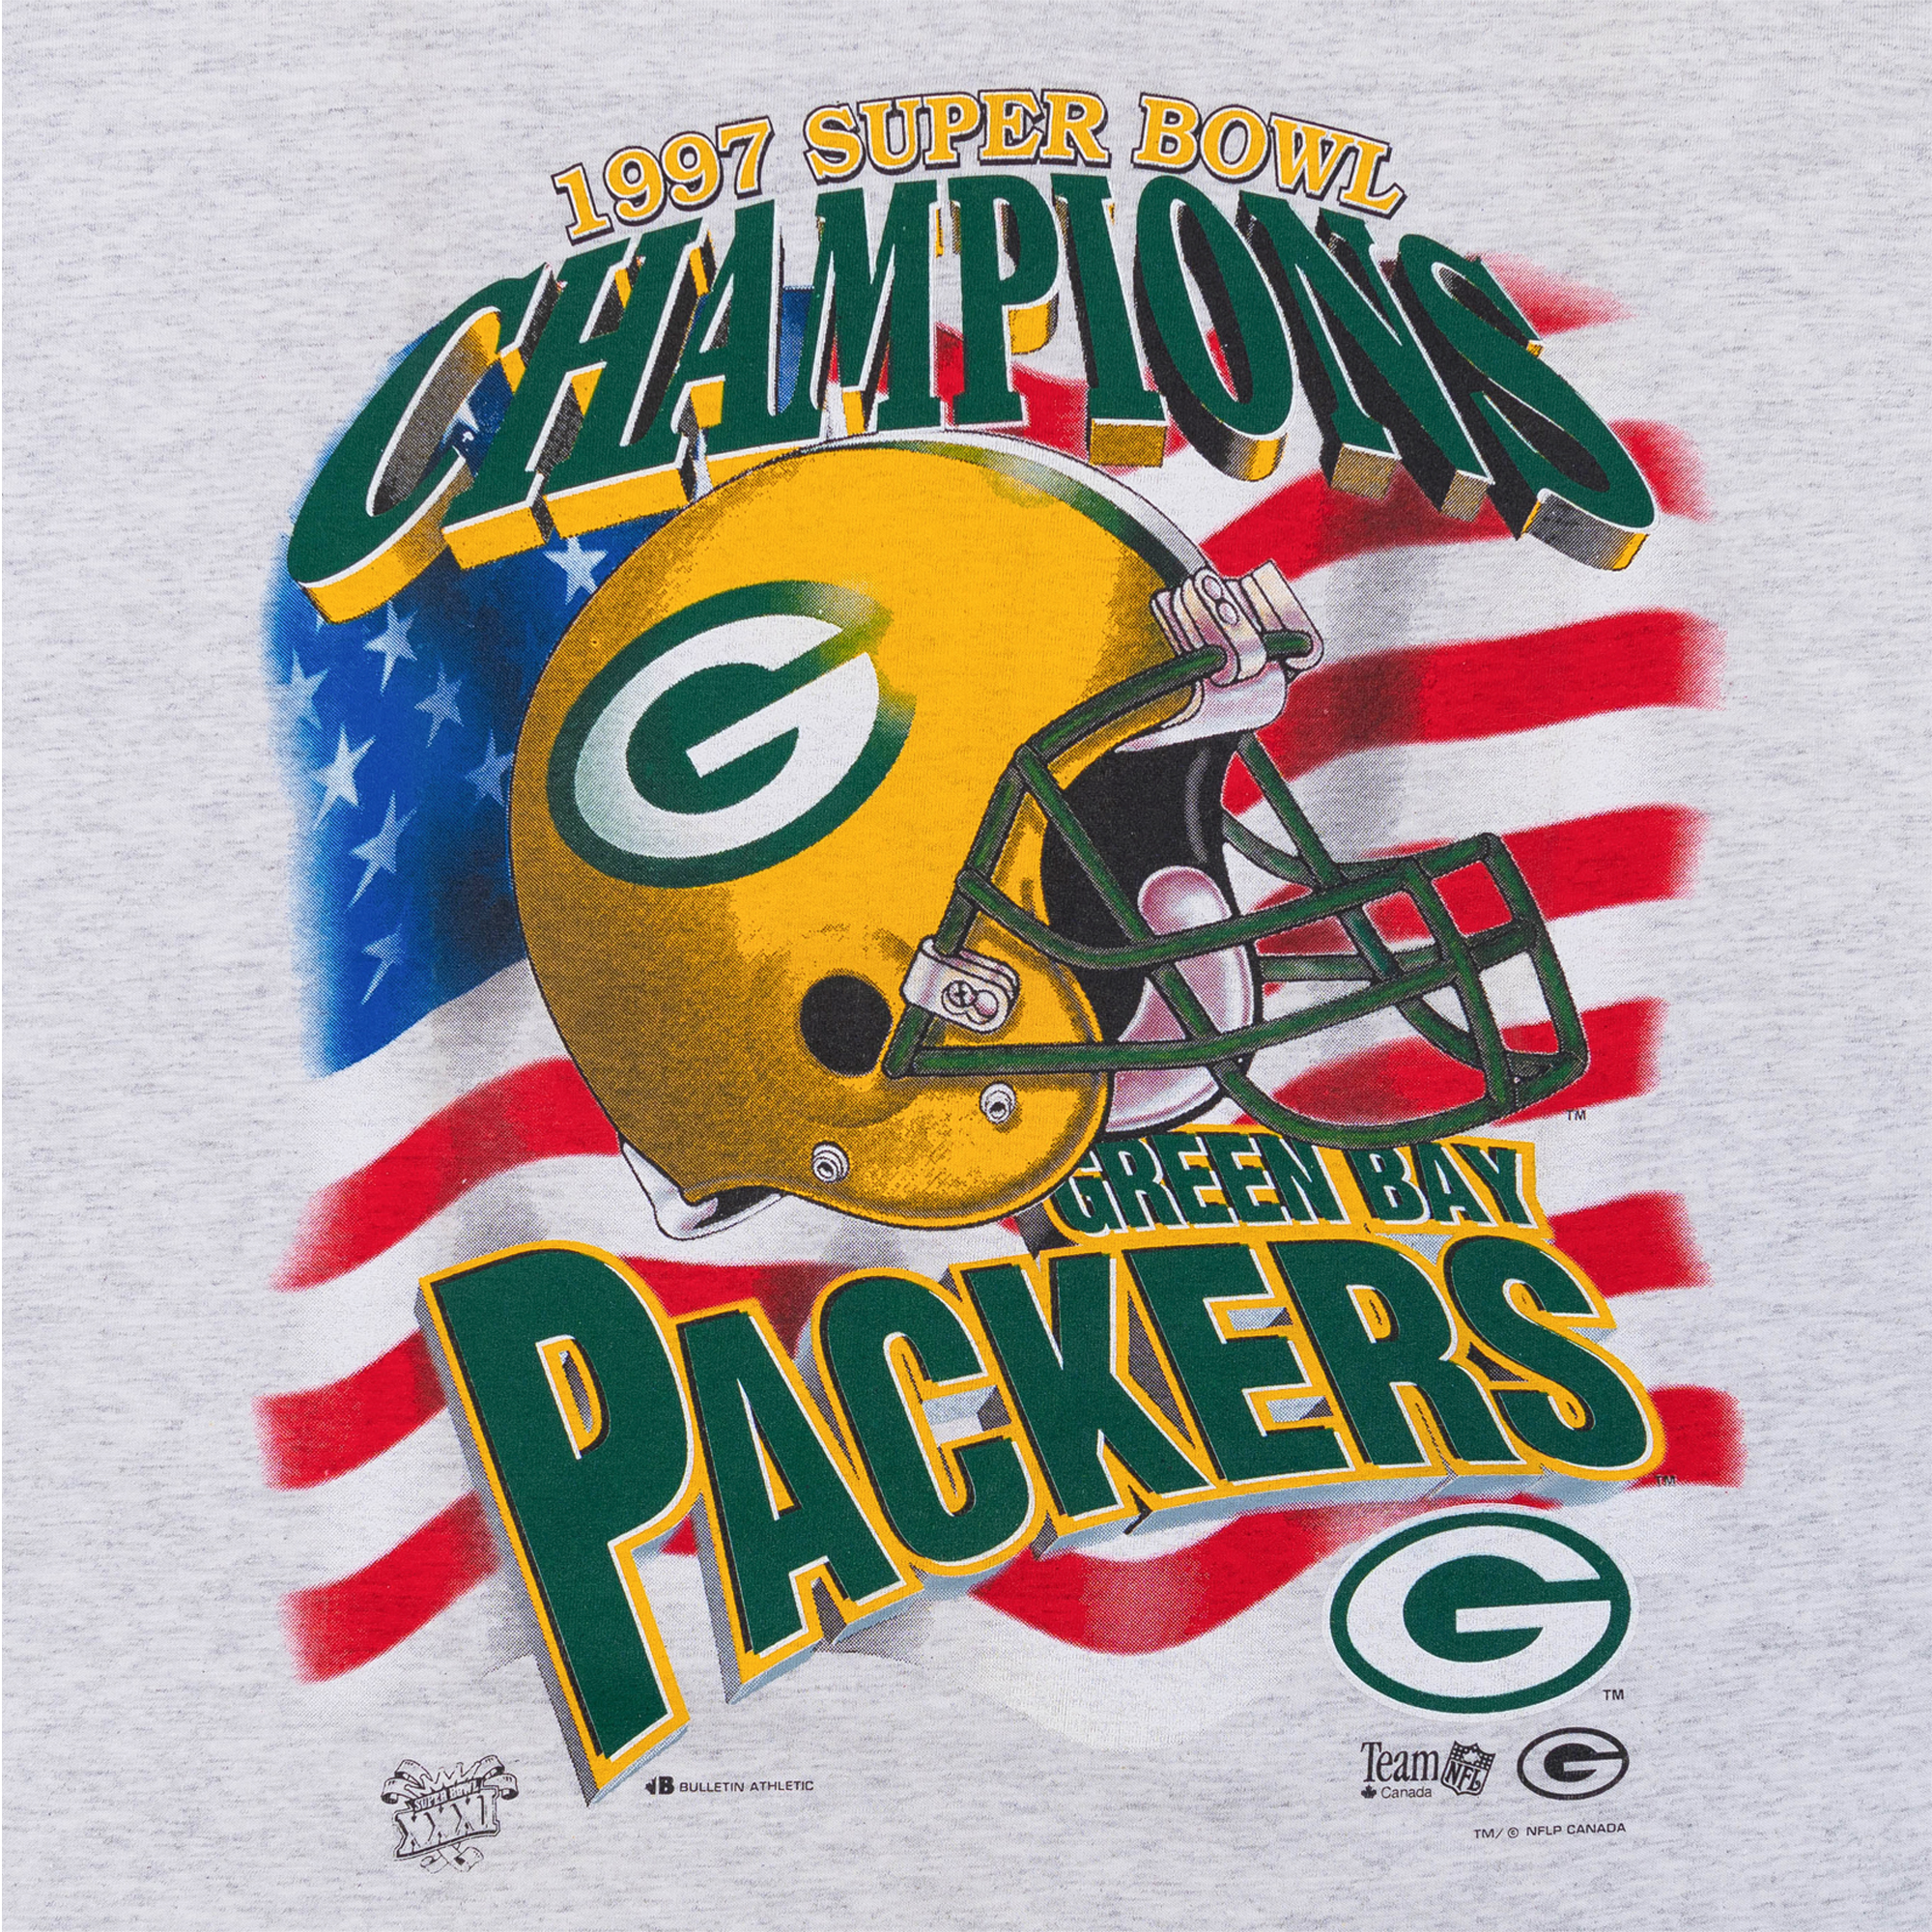 Green Bay Packers 1997 Champs Bulletin Athletics NFL Tee Grey-PLUS